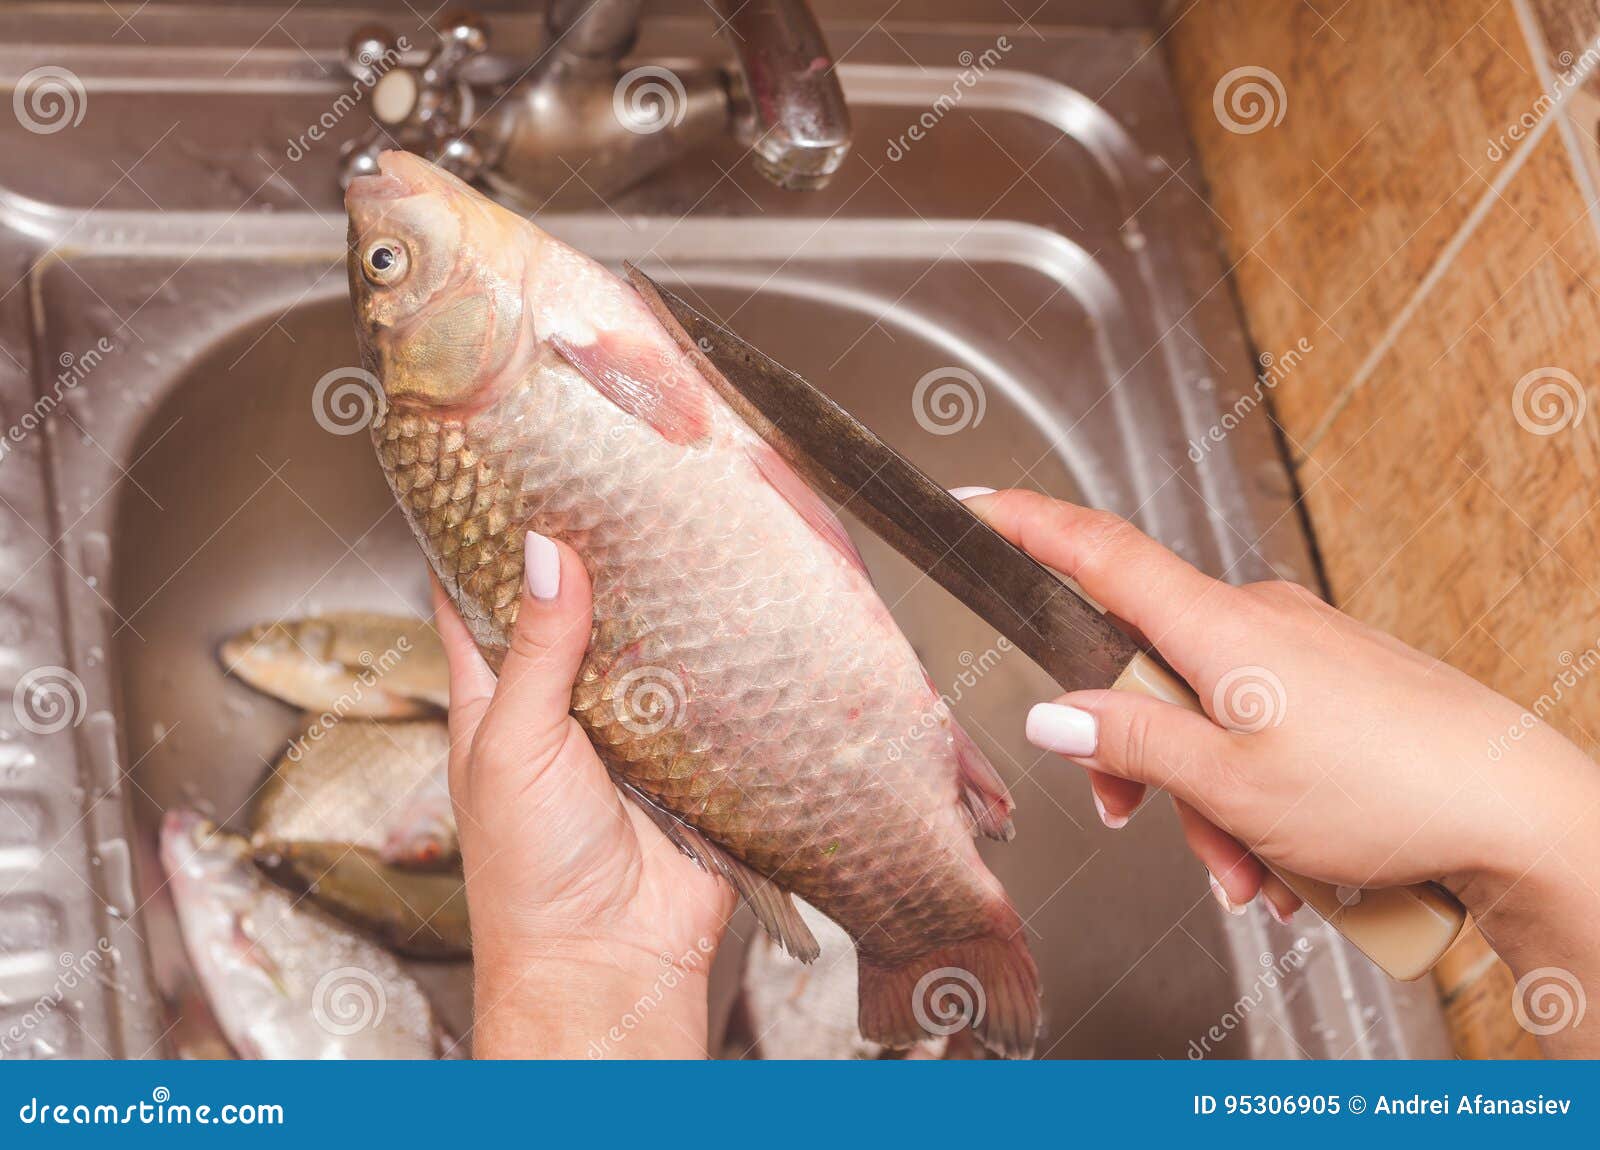 Gutting and Cleaning of Fish Over the Sink Stock Image - Image of